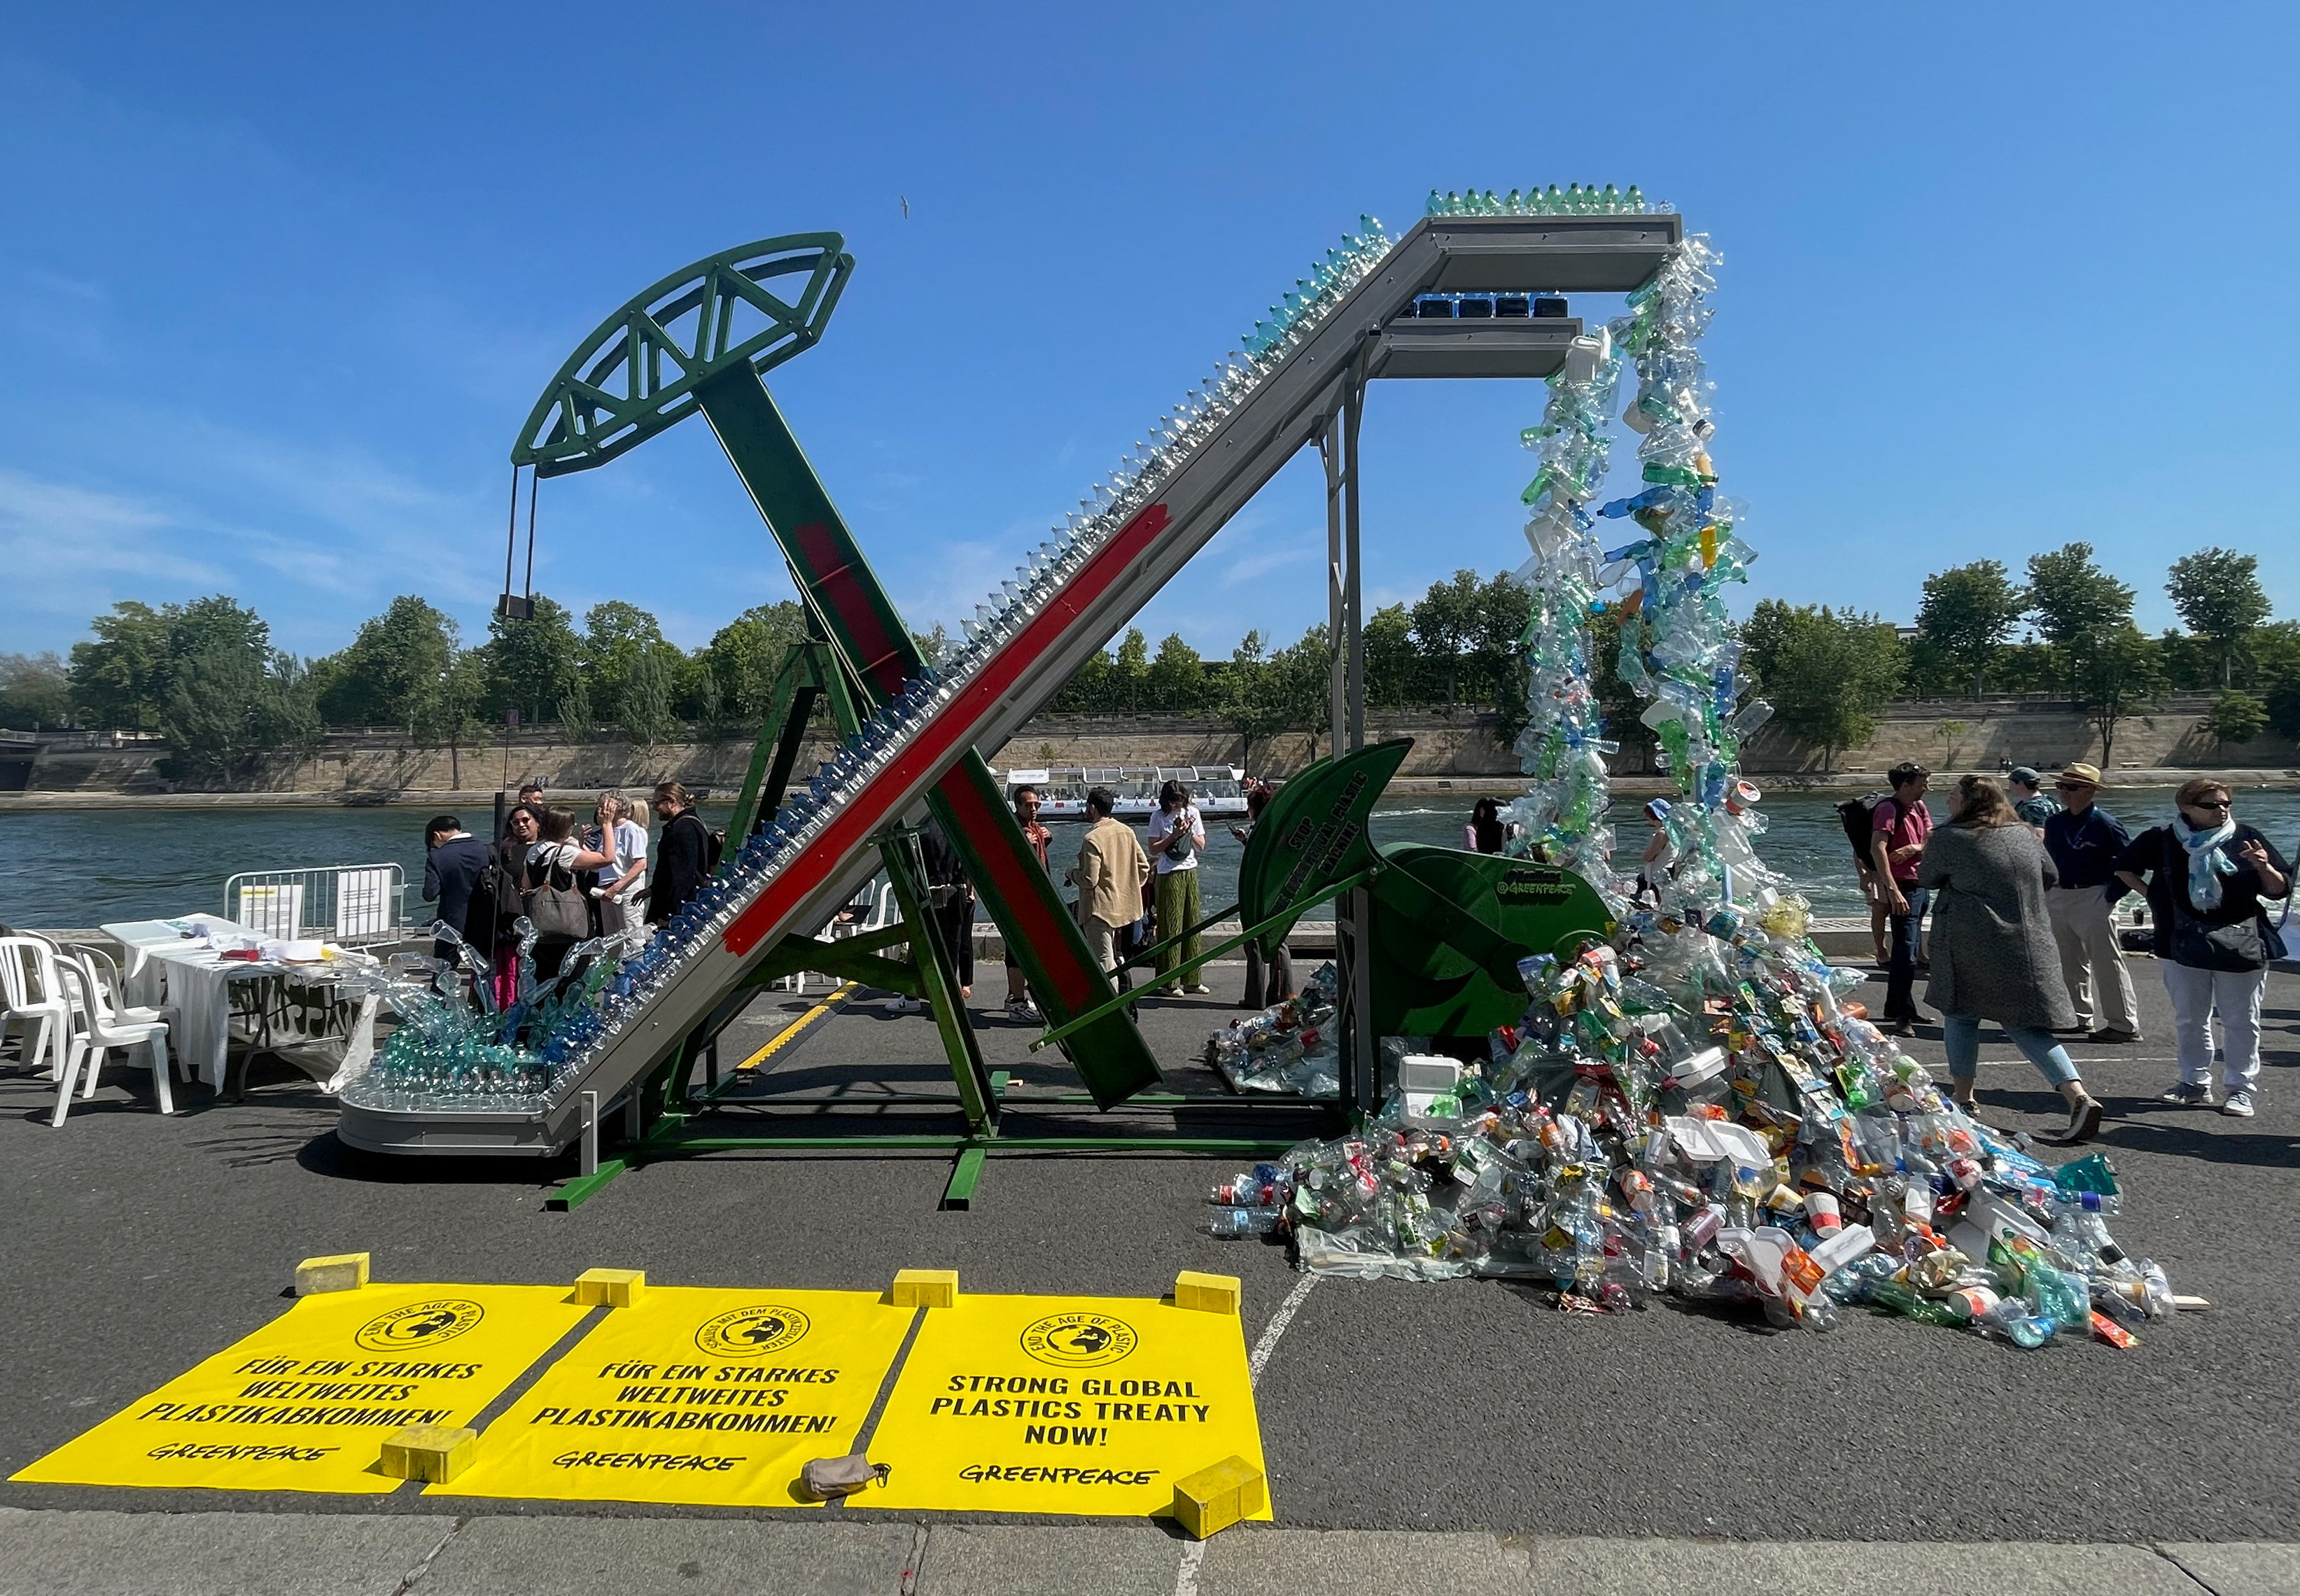 Greenpeace International unveils an art installation by artist Benjamin Von Wong, ahead of a United Nations Environment Programme summit on reducing plastic pollution, in Paris